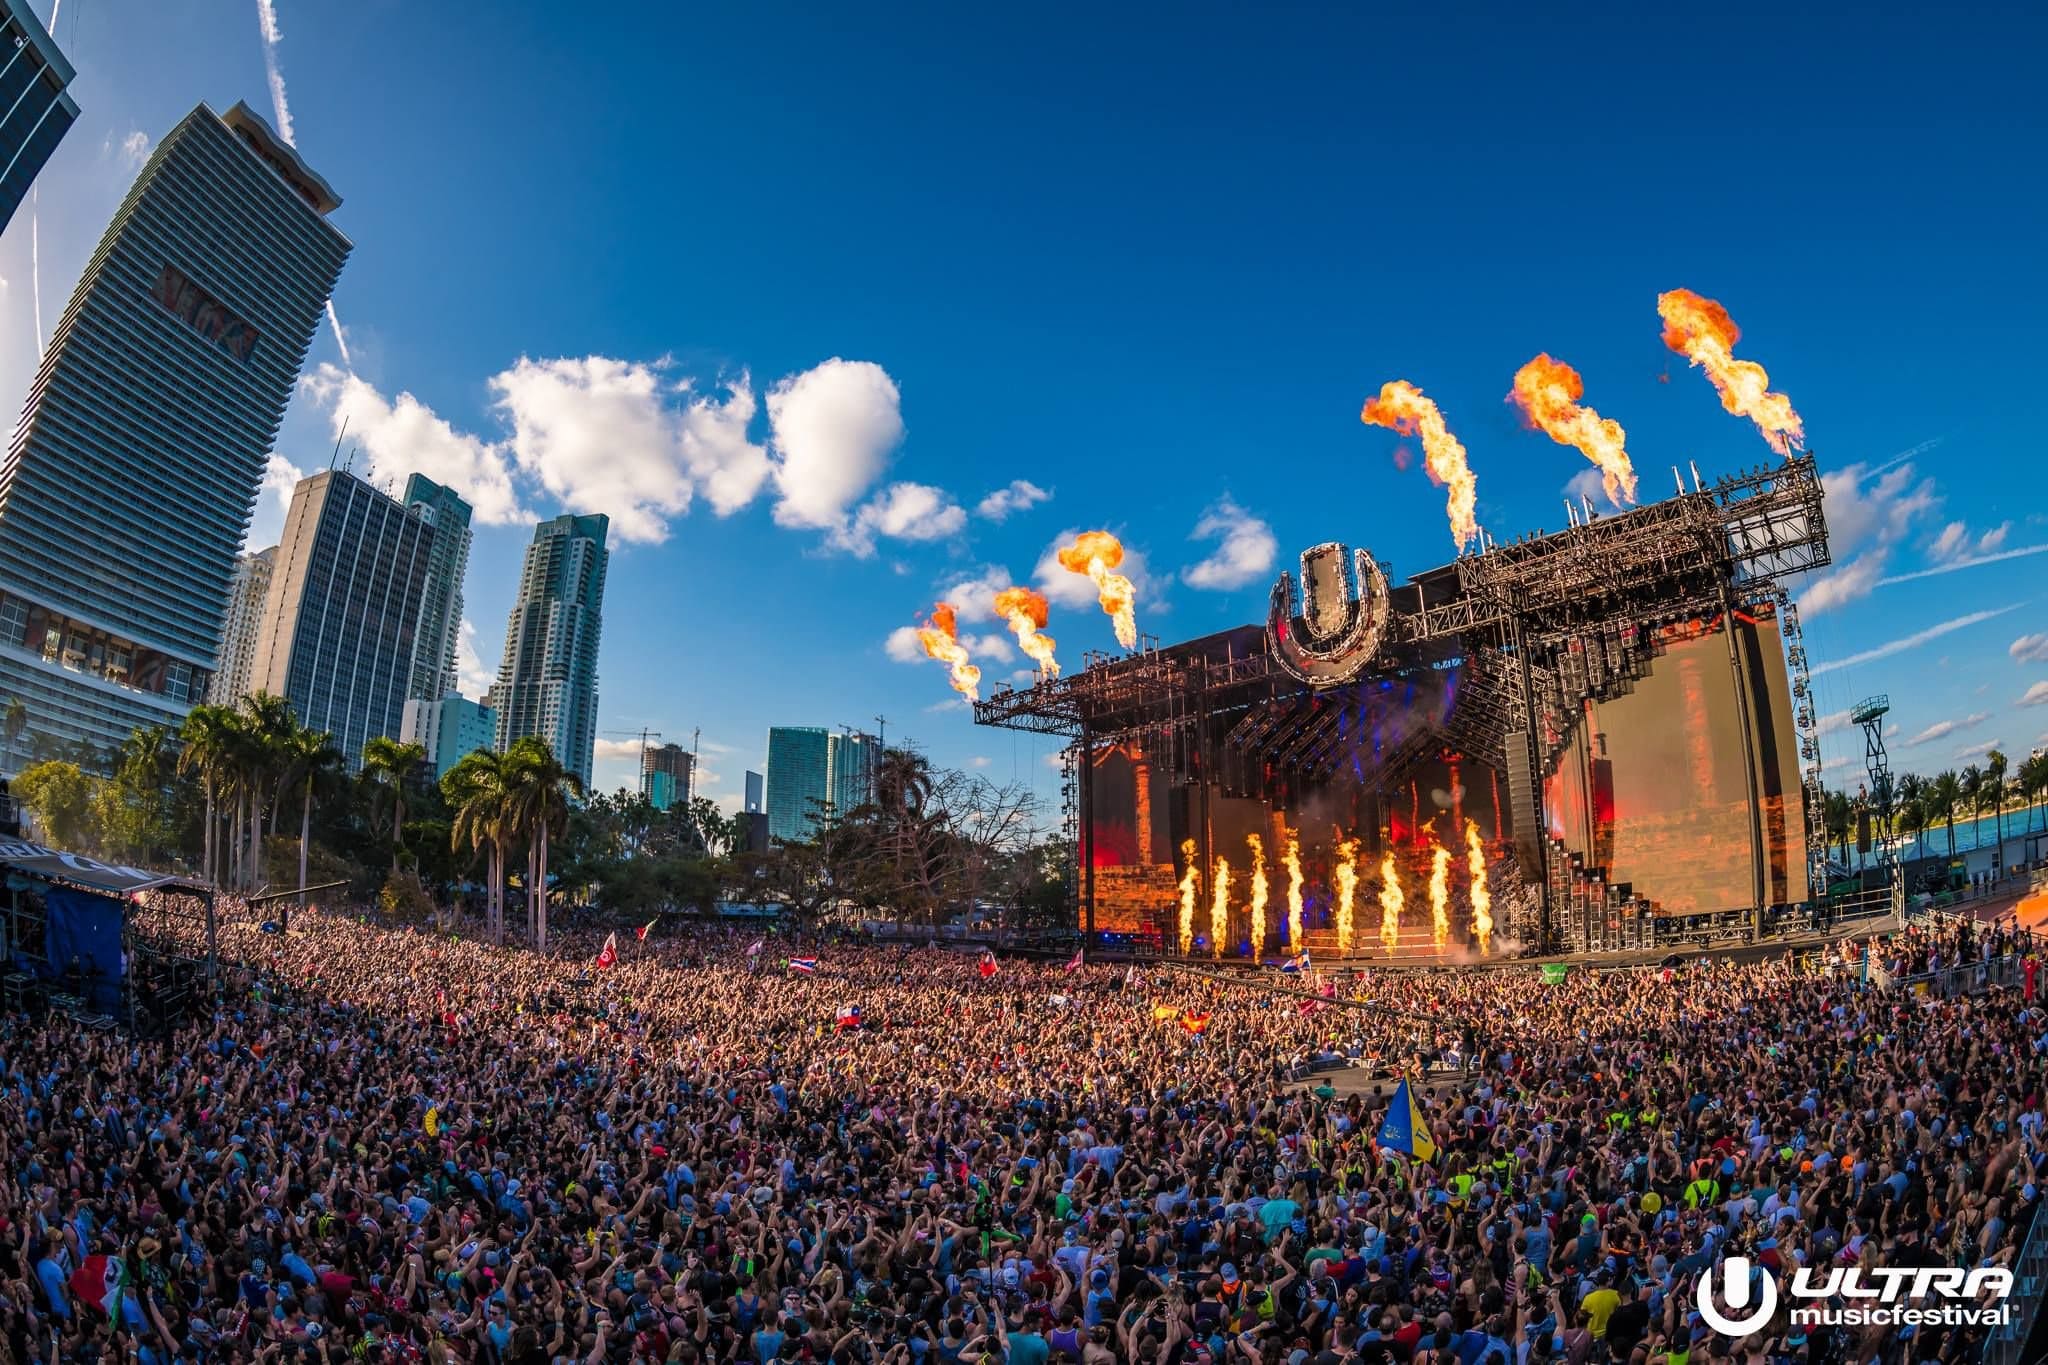 ULTRA MUSIC FESTIVAL STILL HAS YET TO SIGN CONTRACTS FOR 2020 EVENT